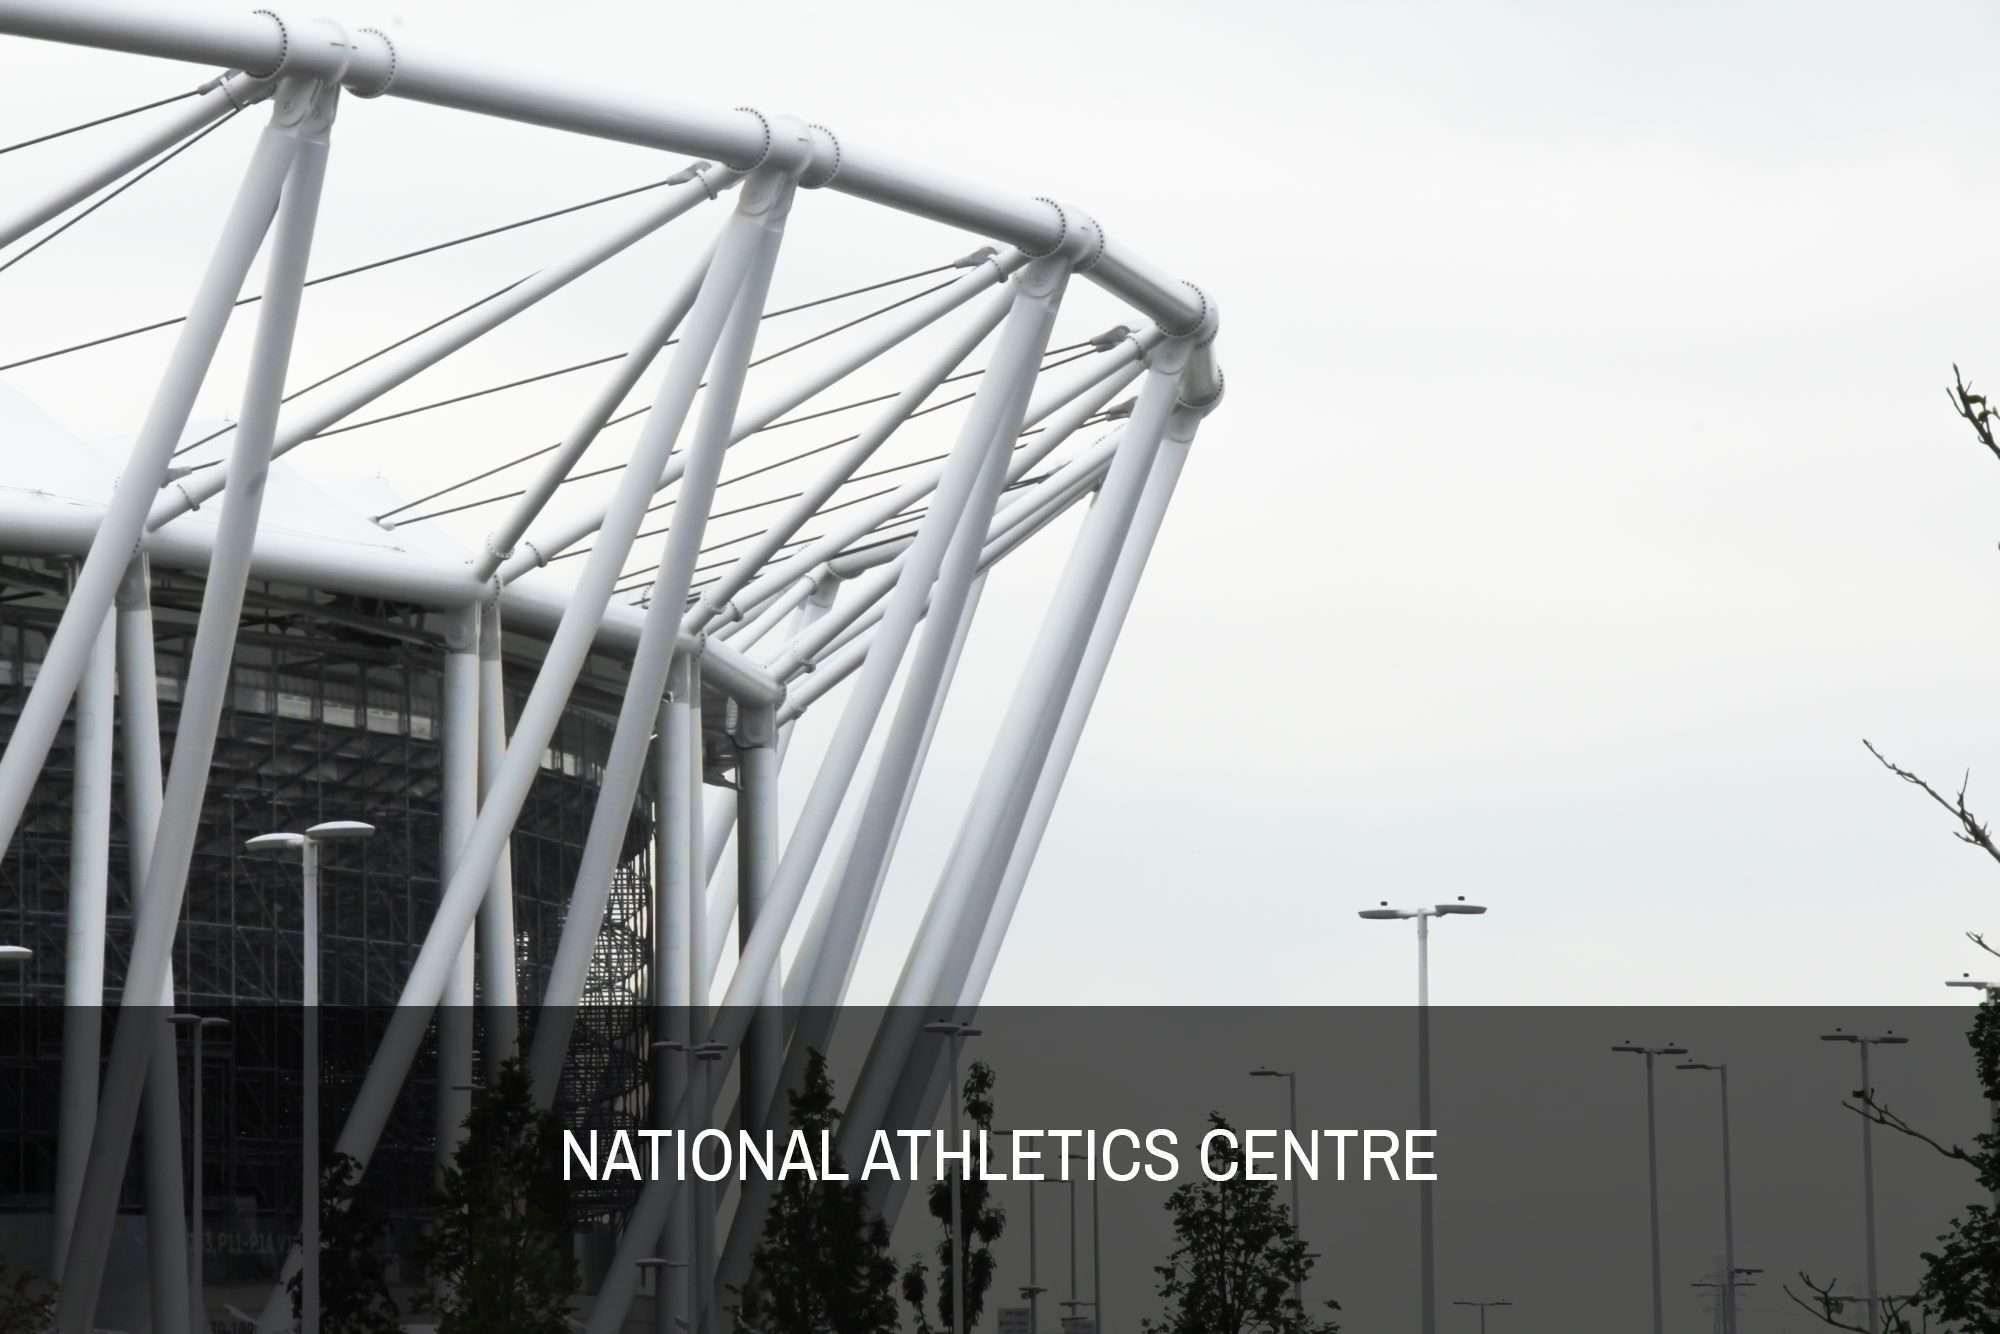 National-Athletics-Centre-alap-referencia.jpg